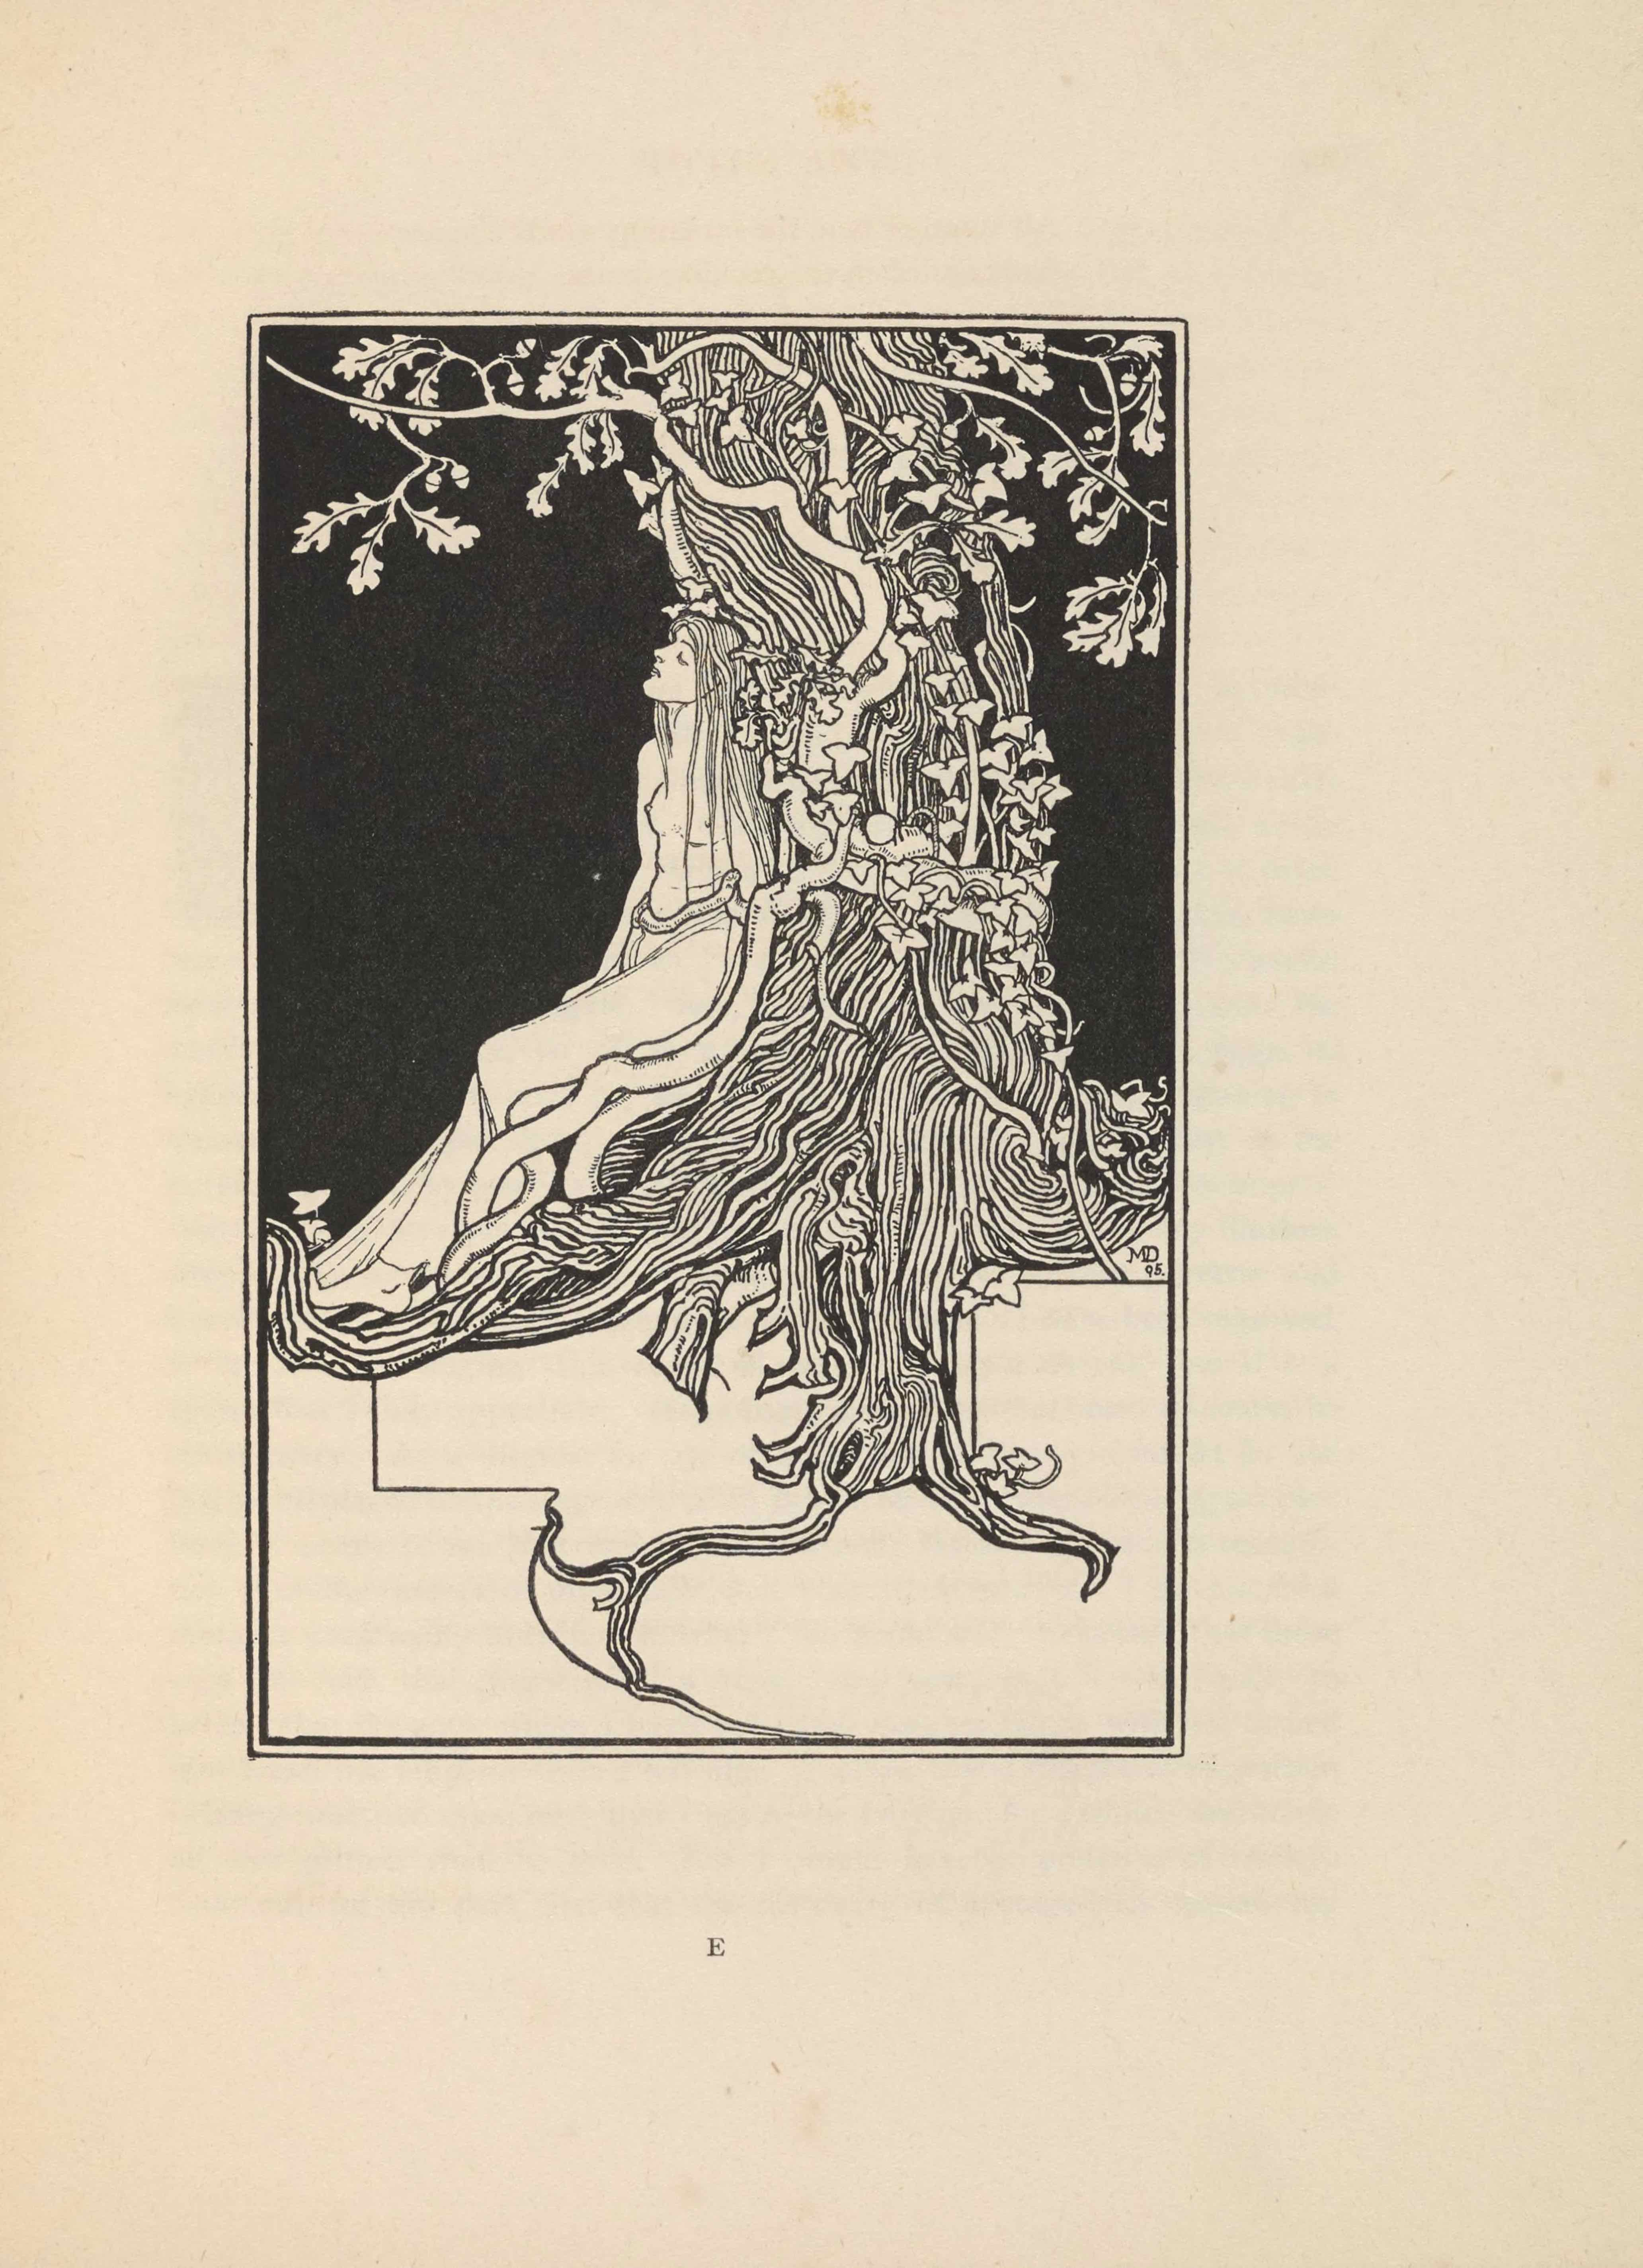 The line-block reproduction of Dearmer’s pen-and-ink drawing is portrait orientation. The image shows a female figure or Dryad in profile, leaning back against an oak tree; together, the tree and woman take up the central area of the composition. The bottom third of the page is white in colour, and the top two-thirds is black. The white bottom third shows the underground tree roots. The Dryad’s feet start at the bottom of the black section on the left edge of the page and her legs angle diagonally up and to the right. Her torso and upper body are positioned vertically and leaned against the tree trunk. Her body is turned slightly towards the viewer. She is naked except for a thin transparent piece of material wrapped around her lower body from the waist down to the ankles. She has her chin tilted up and her eyes are closed. She has long branch-like hair and a tree branch is wrapped around her waist. The tree is made of many long and curvy vertical lines. There are white branches emerging from behind the woman’s legs out of the tree trunk and wrapping up and around the trunk until they split out to the left and right of the tree at the top of the frame. The branches have white oak leaves growing from them. There is a thin vine wrapping up the tree which starts from the right side, opposite the woman. The vine has ivy leaves growing on it. The roots growing beneath the ground level extend straight down from the middle and then jut off diagonally towards the bottom left and right corners. There is a straight black line that descends down from the root just below the feet of the woman before cutting in at a ninety degree angle to the right and then curving down towards the left and then back to the right, finishing at the centre of the bottom edge. There is another straight black line starting at the top of the white section on the right page edge and cutting to the left before cutting straight down at a ninety degree angle. Just below the tree roots on the right edge of the page is the artist’s initials and year that the art was created: “MD // 95” [caps].